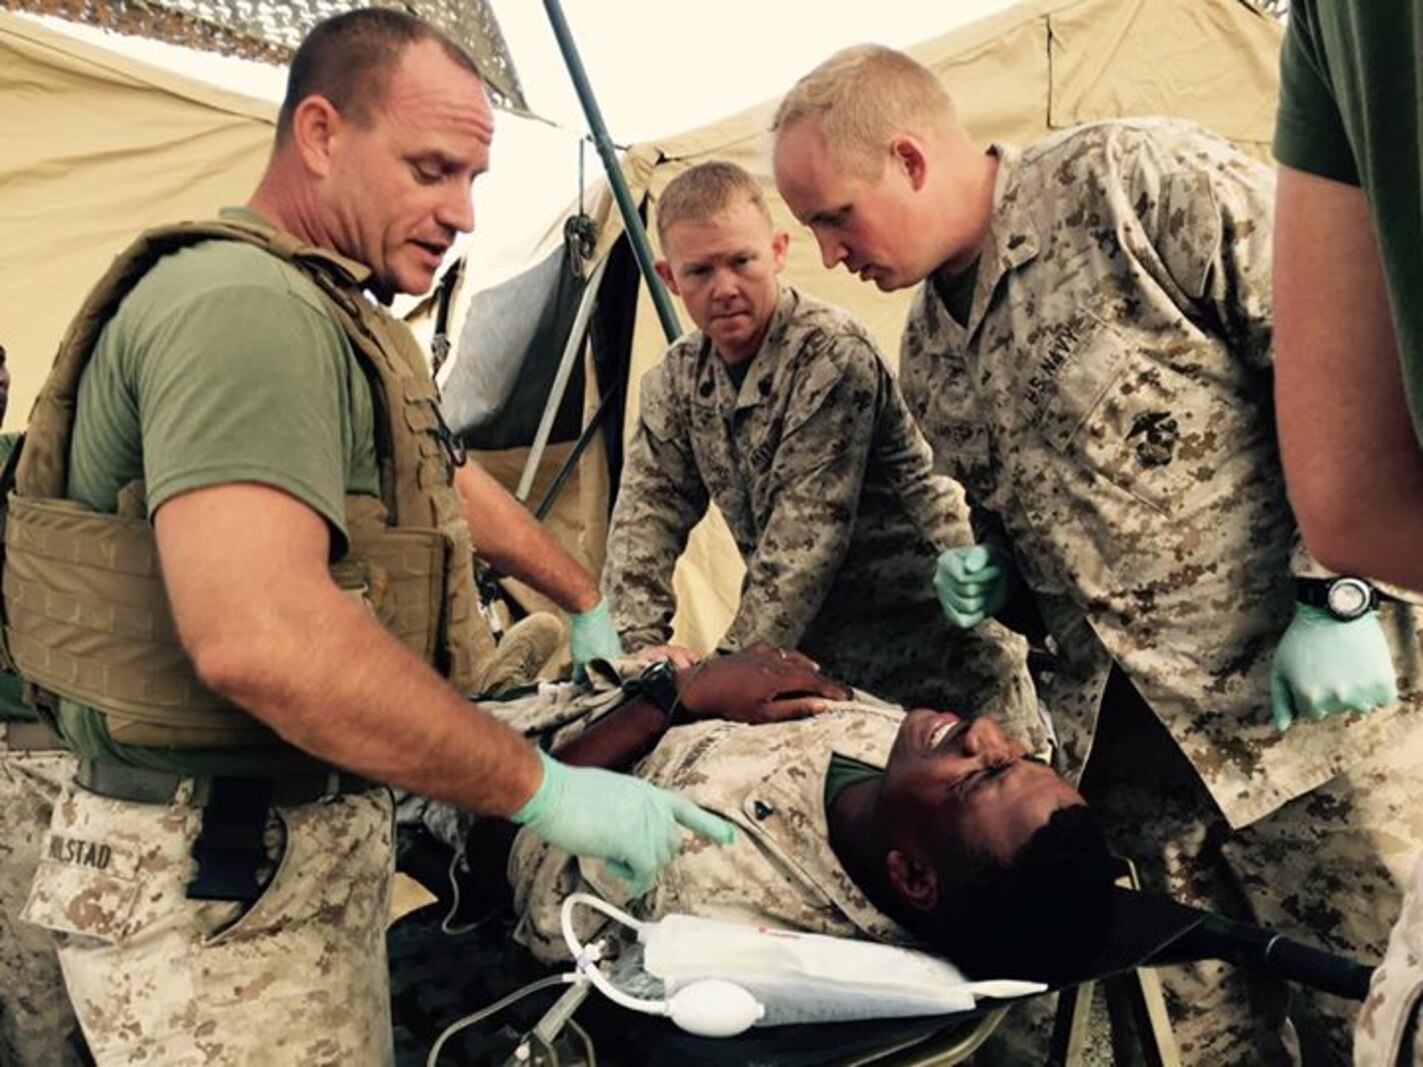 Sailors and Marines of 1st Medical Battalion conduct a mass casualty drill during Exercise Dawn Blitz 15.
